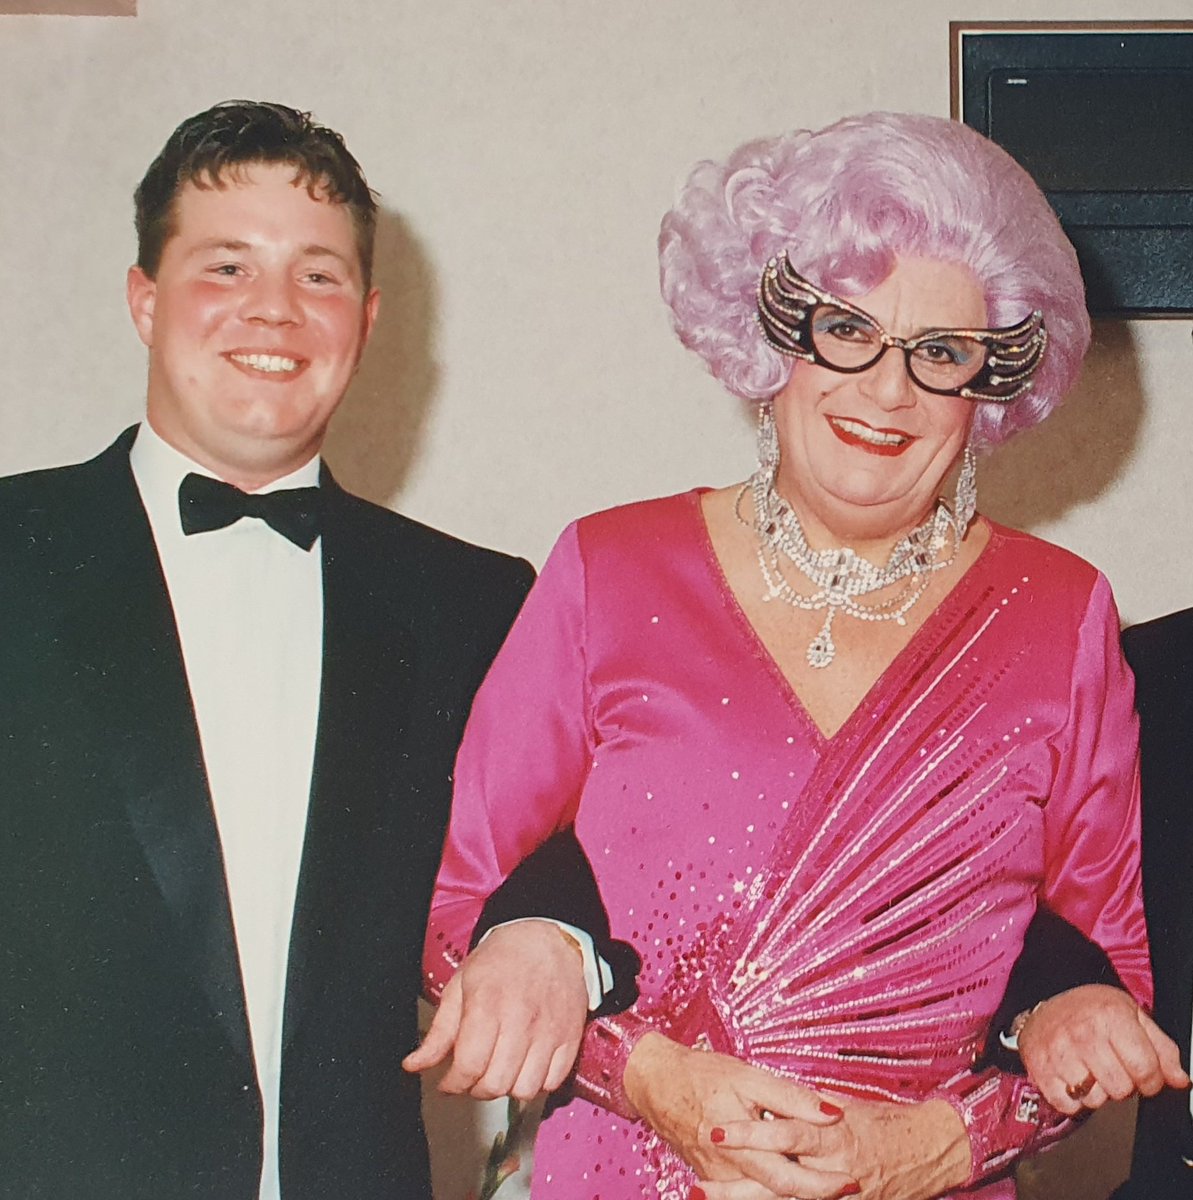 'Hello Dalings'
As good a time as any to post this.
I was 24-25 working in a cabaret club called the Curcus Tavern, in Essex when 'cabaret' was just ceasing to be a thing.

#90s #ripbarryhumphries #dameedna #hellodarlings